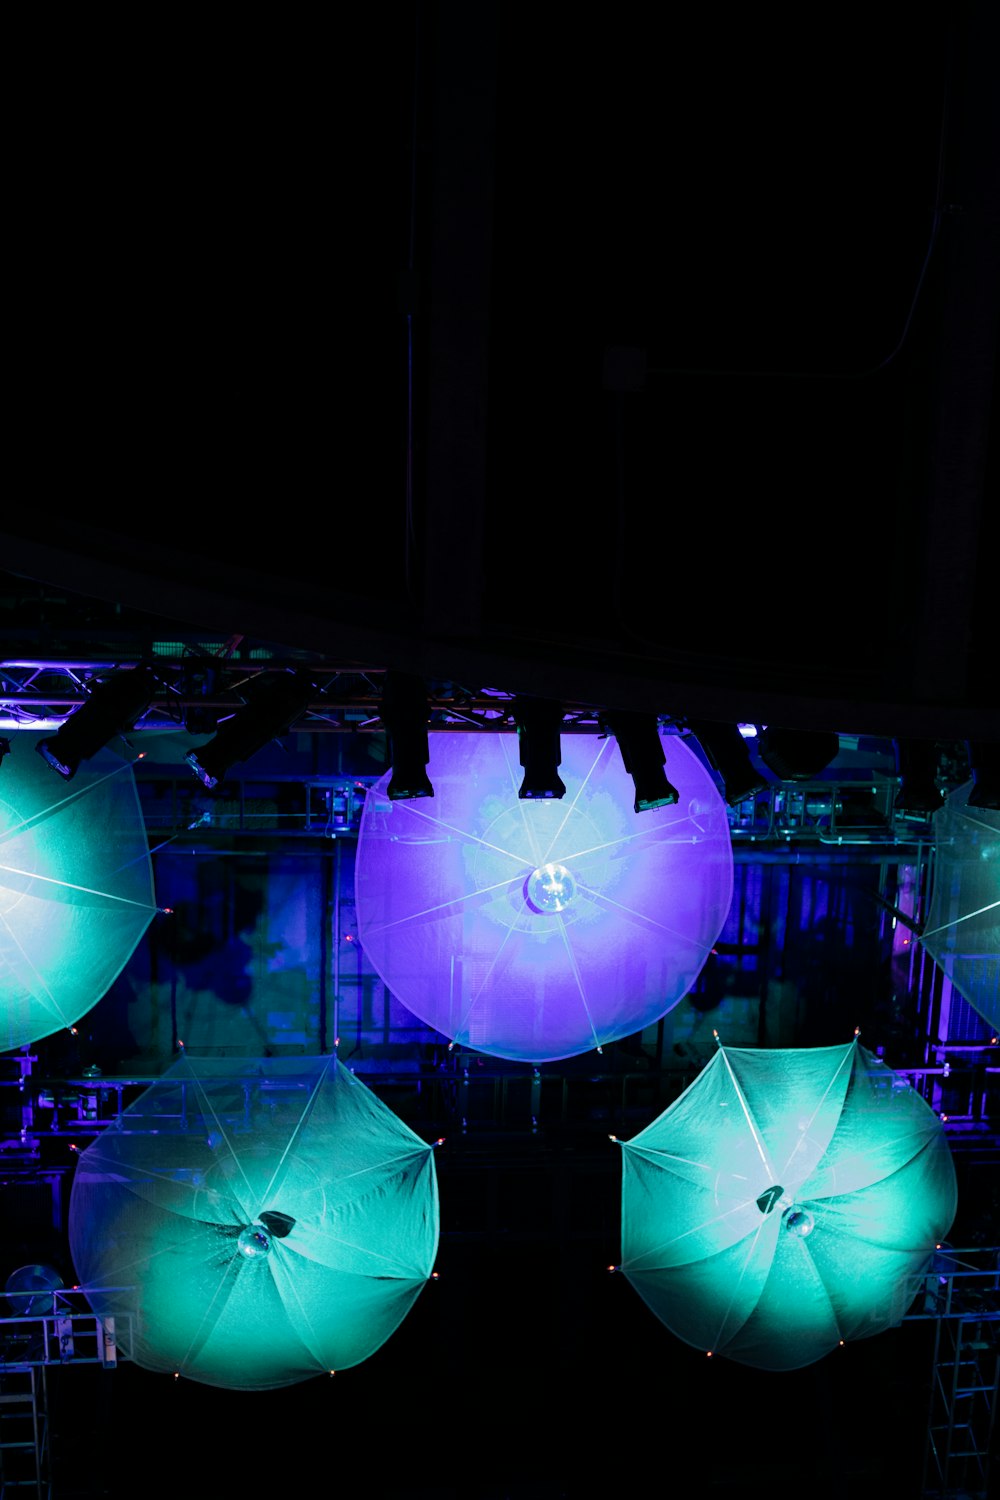 a group of umbrellas lit up in the dark